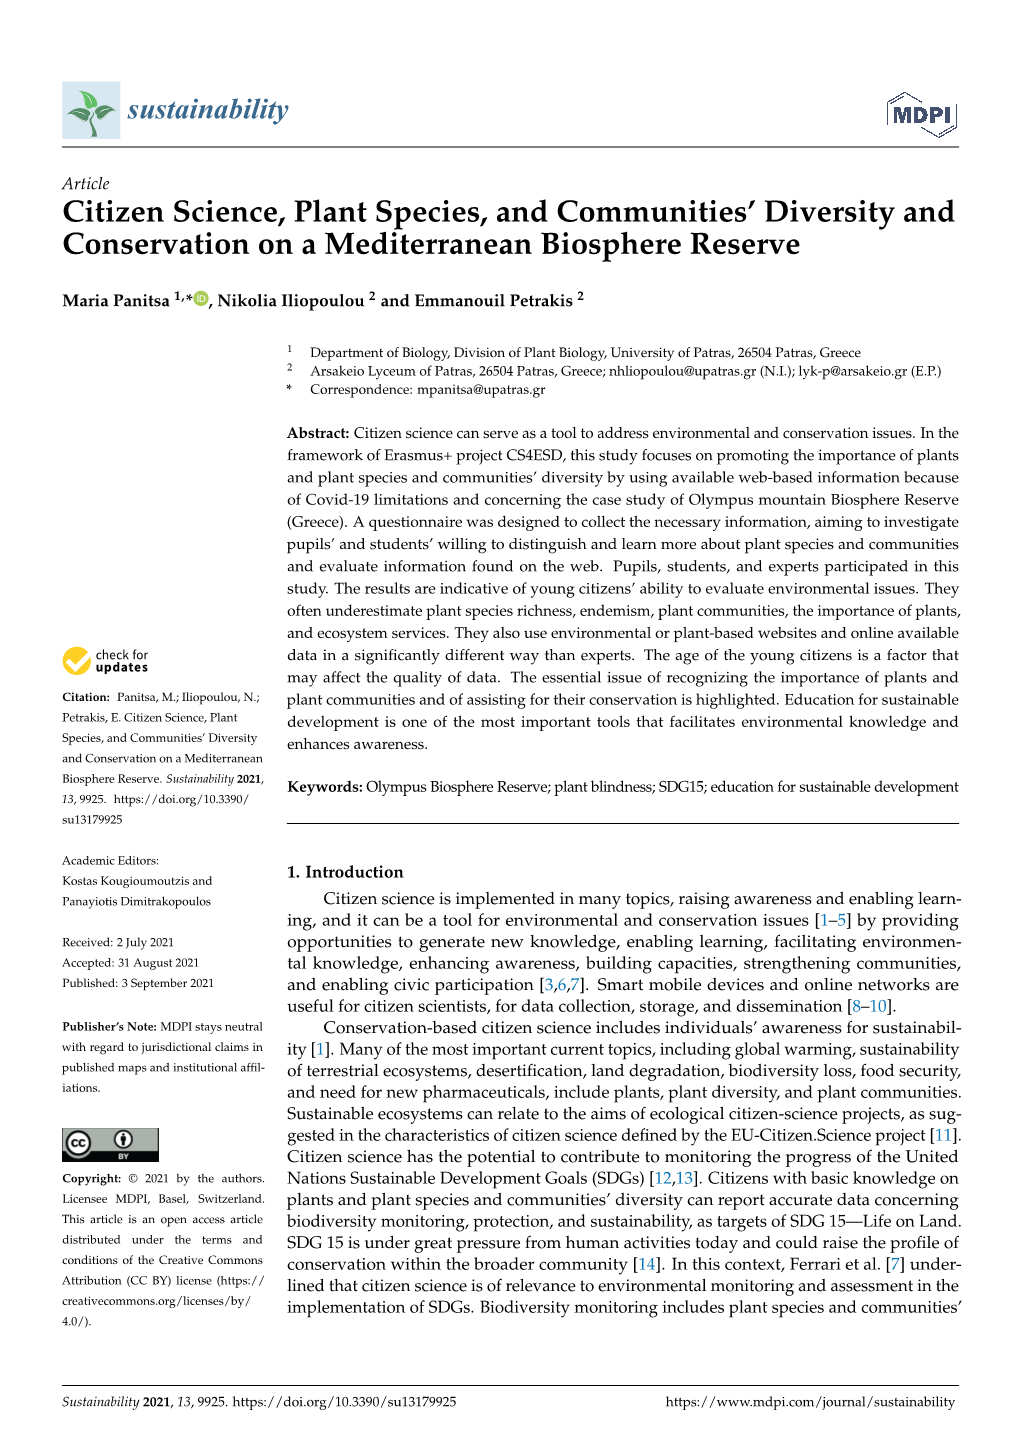 Citizen Science, Plant Species, and Communities' Diversity and Conservation on a Mediterranean Biosphere Reserve